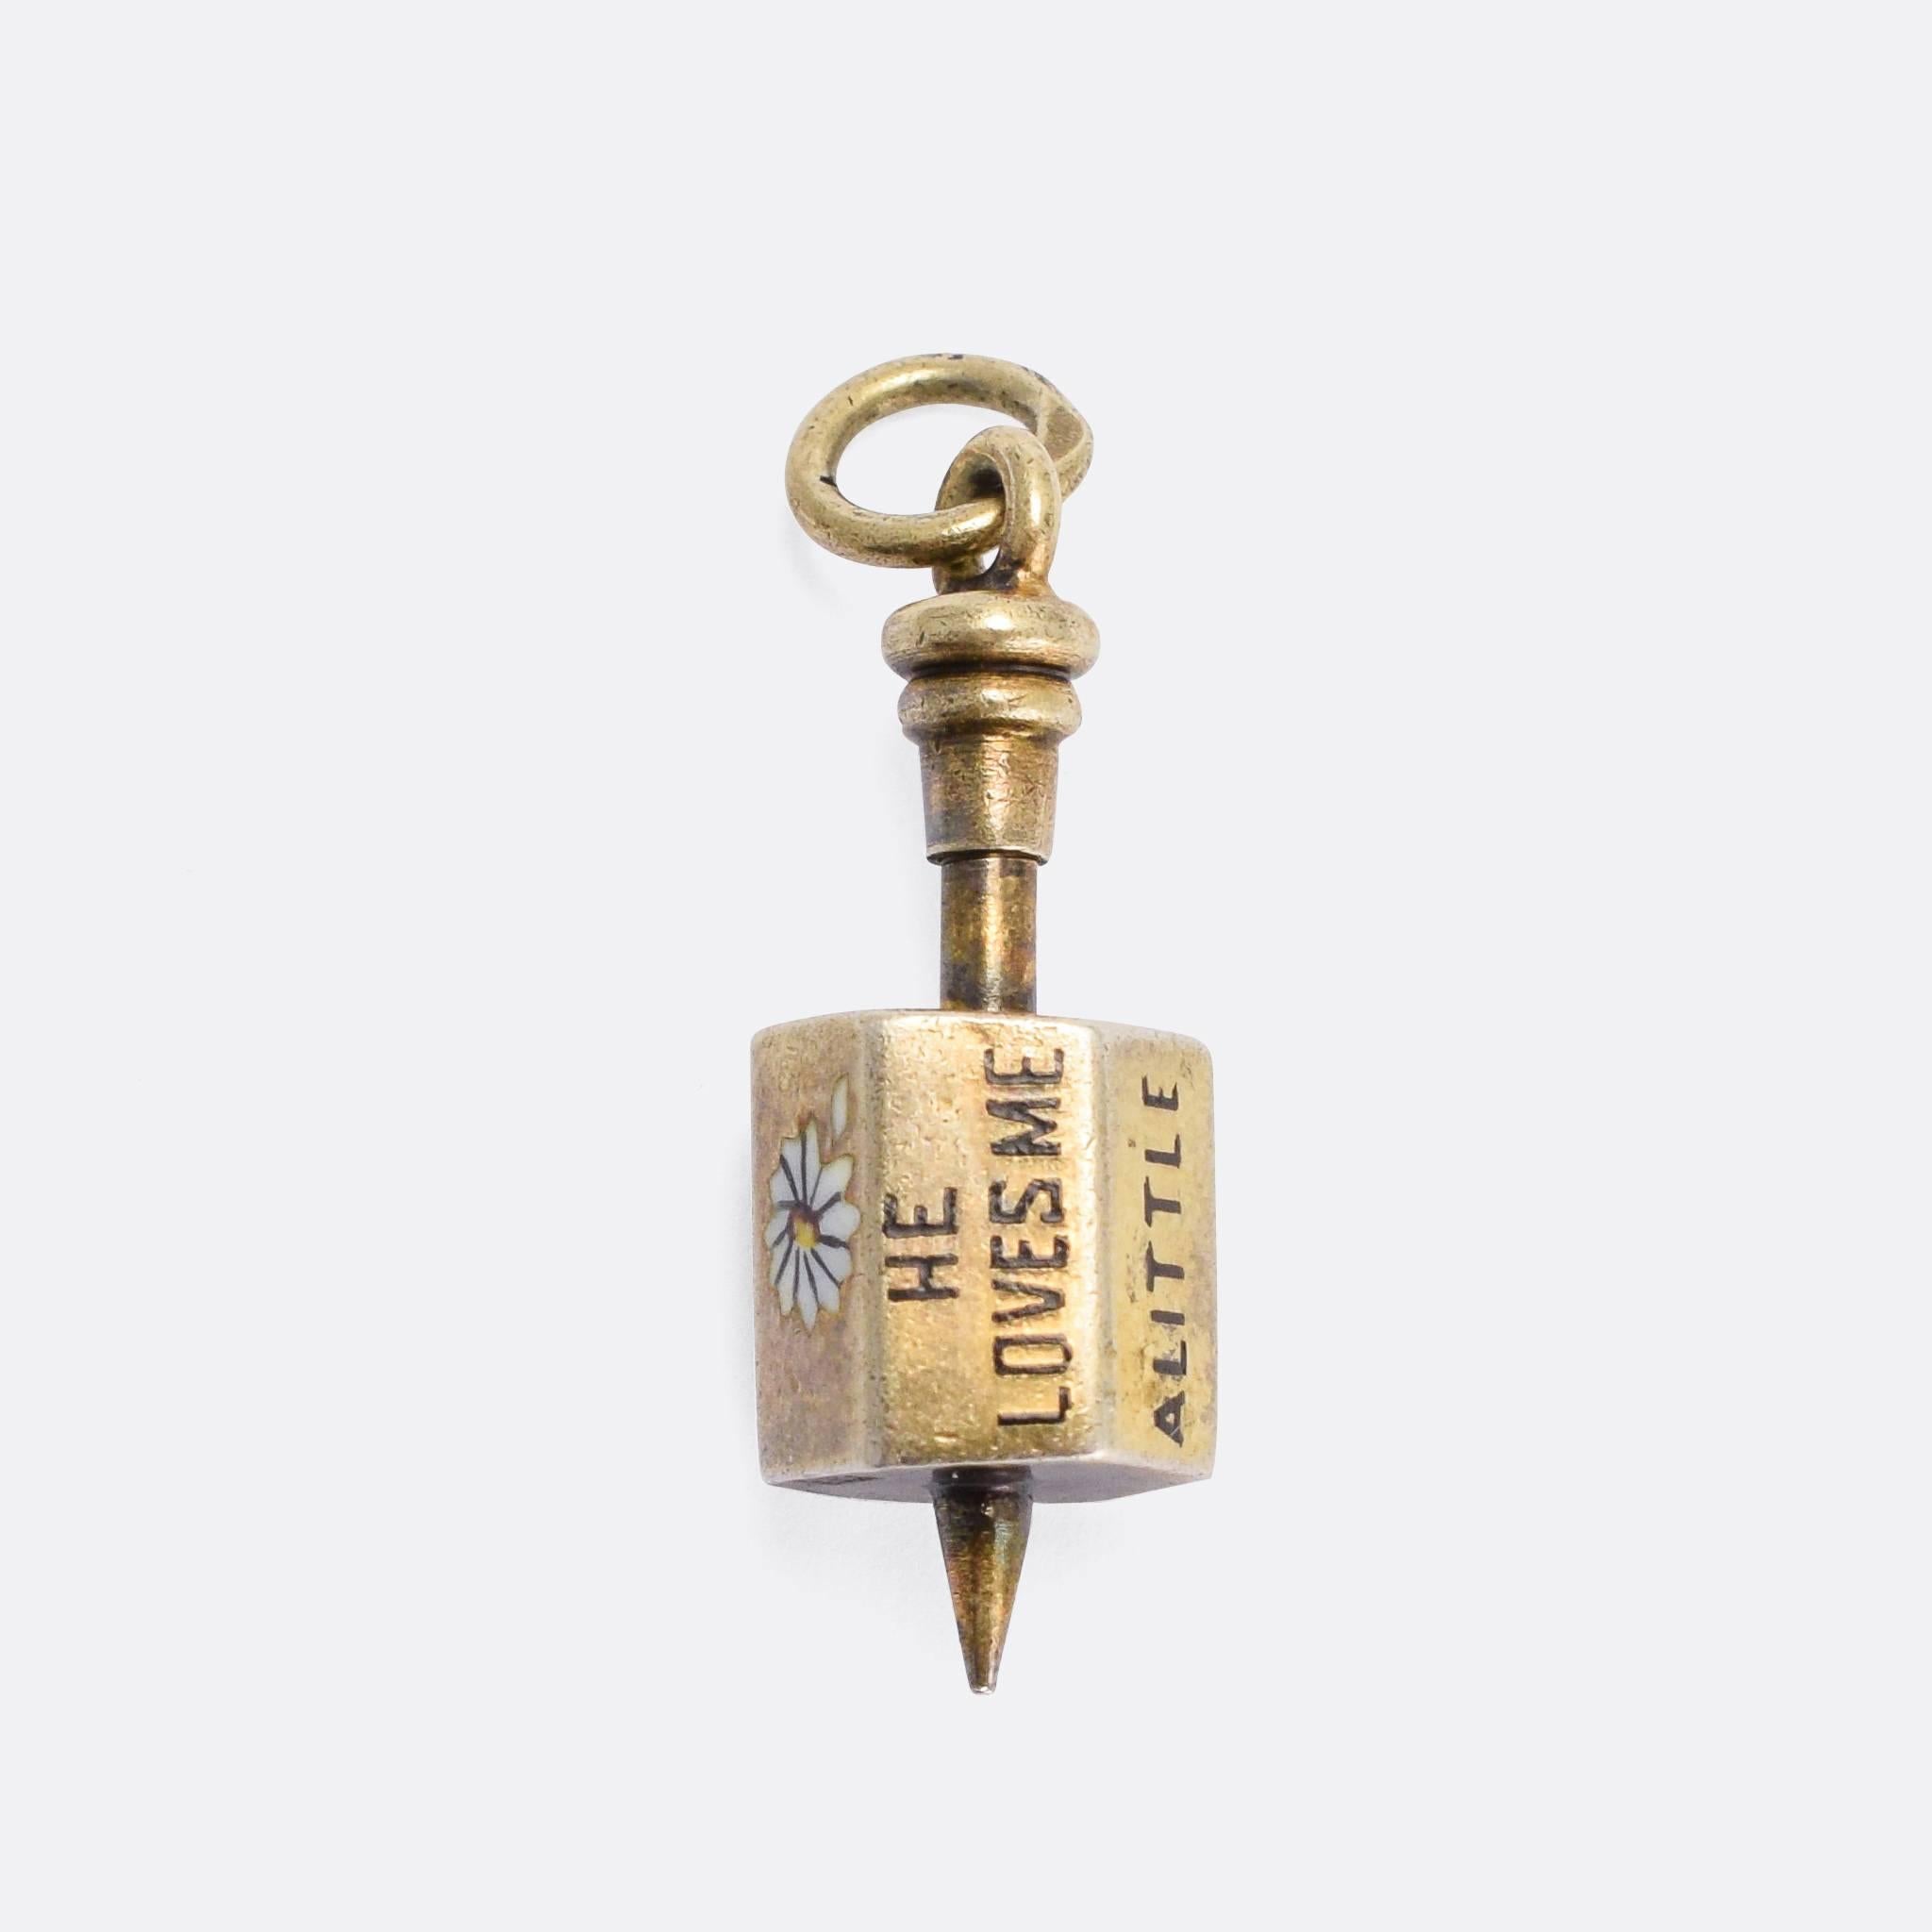 A very unusual antique pendant, modelled as a spinning top. The pendant bail screws off, allowing the body to be spun on the point. When it comes to rest, a message is displayed on the top side:

He Loves Me / A Little / Much / Passionately / He